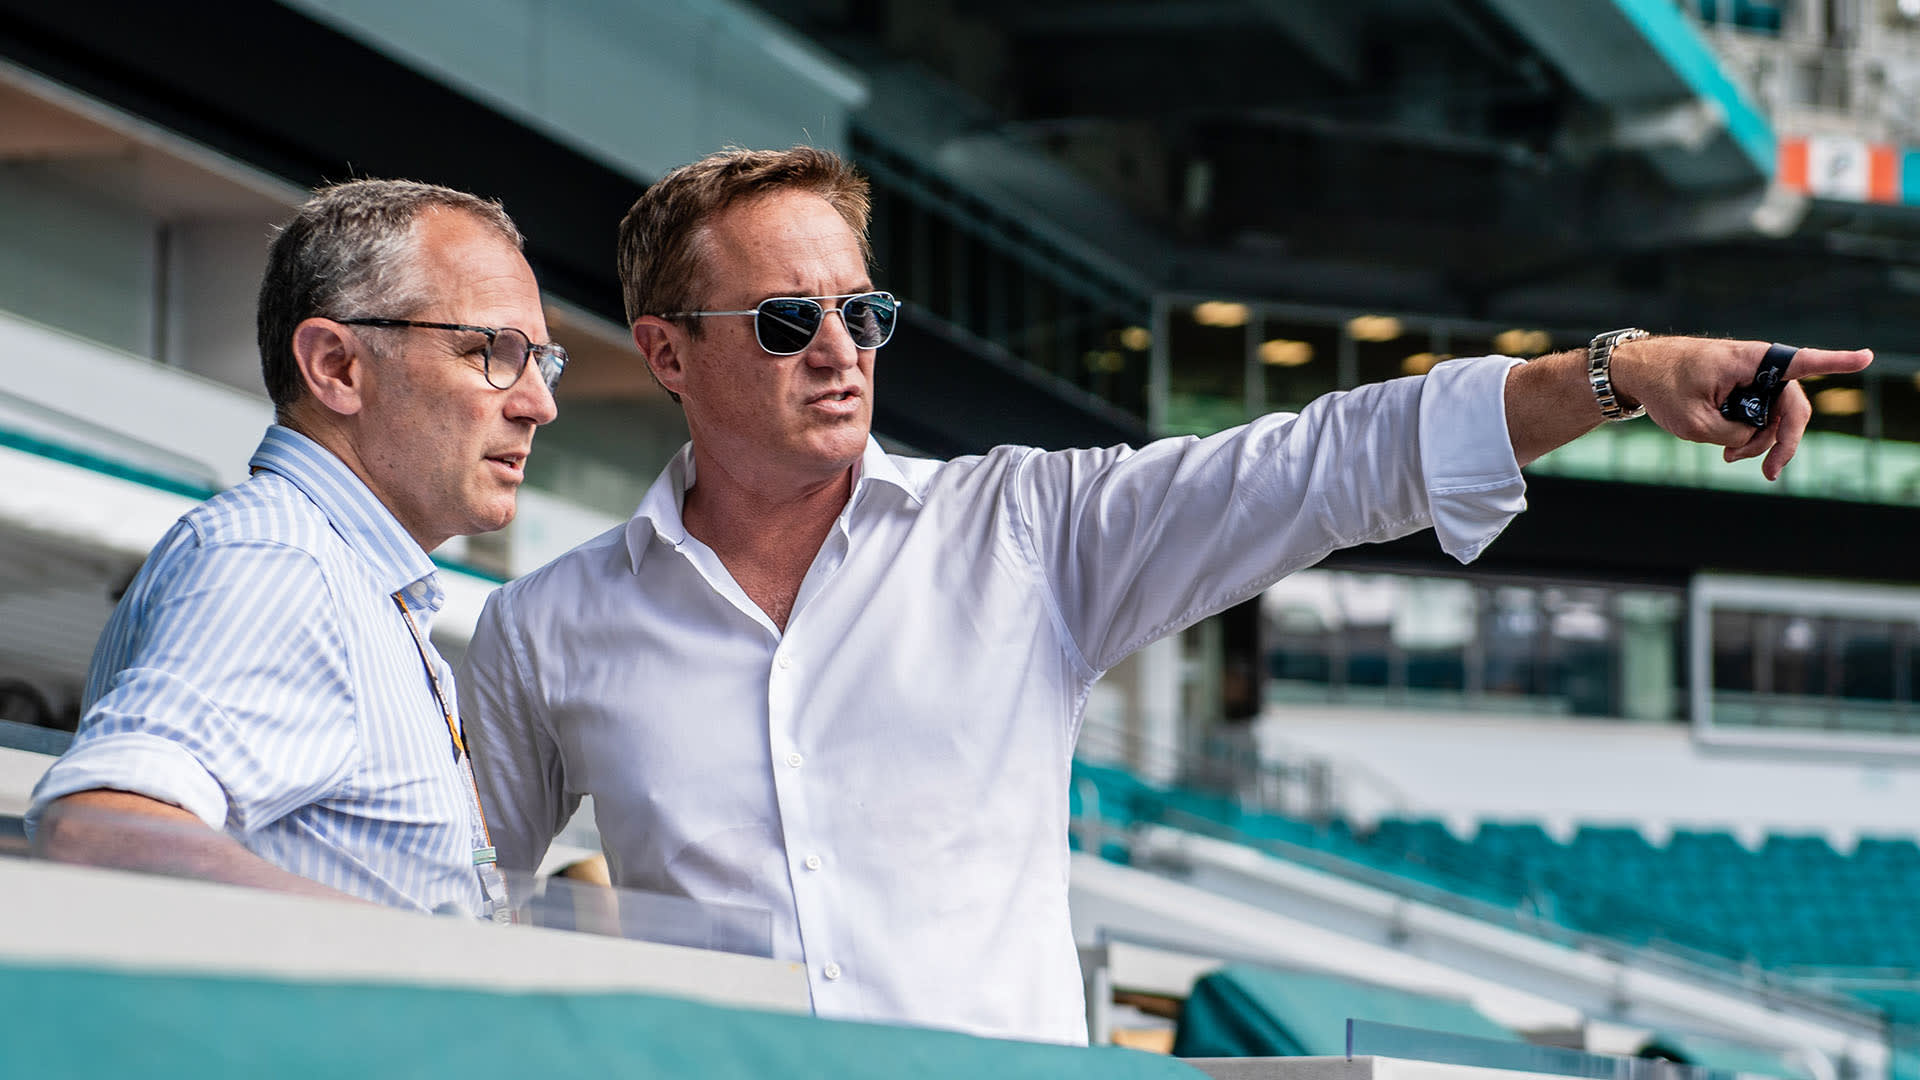 It's a dream come true' – Miami GP managing partner Tom Garfinkel on the  'honour' of bringing F1 to the city | Formula 1®